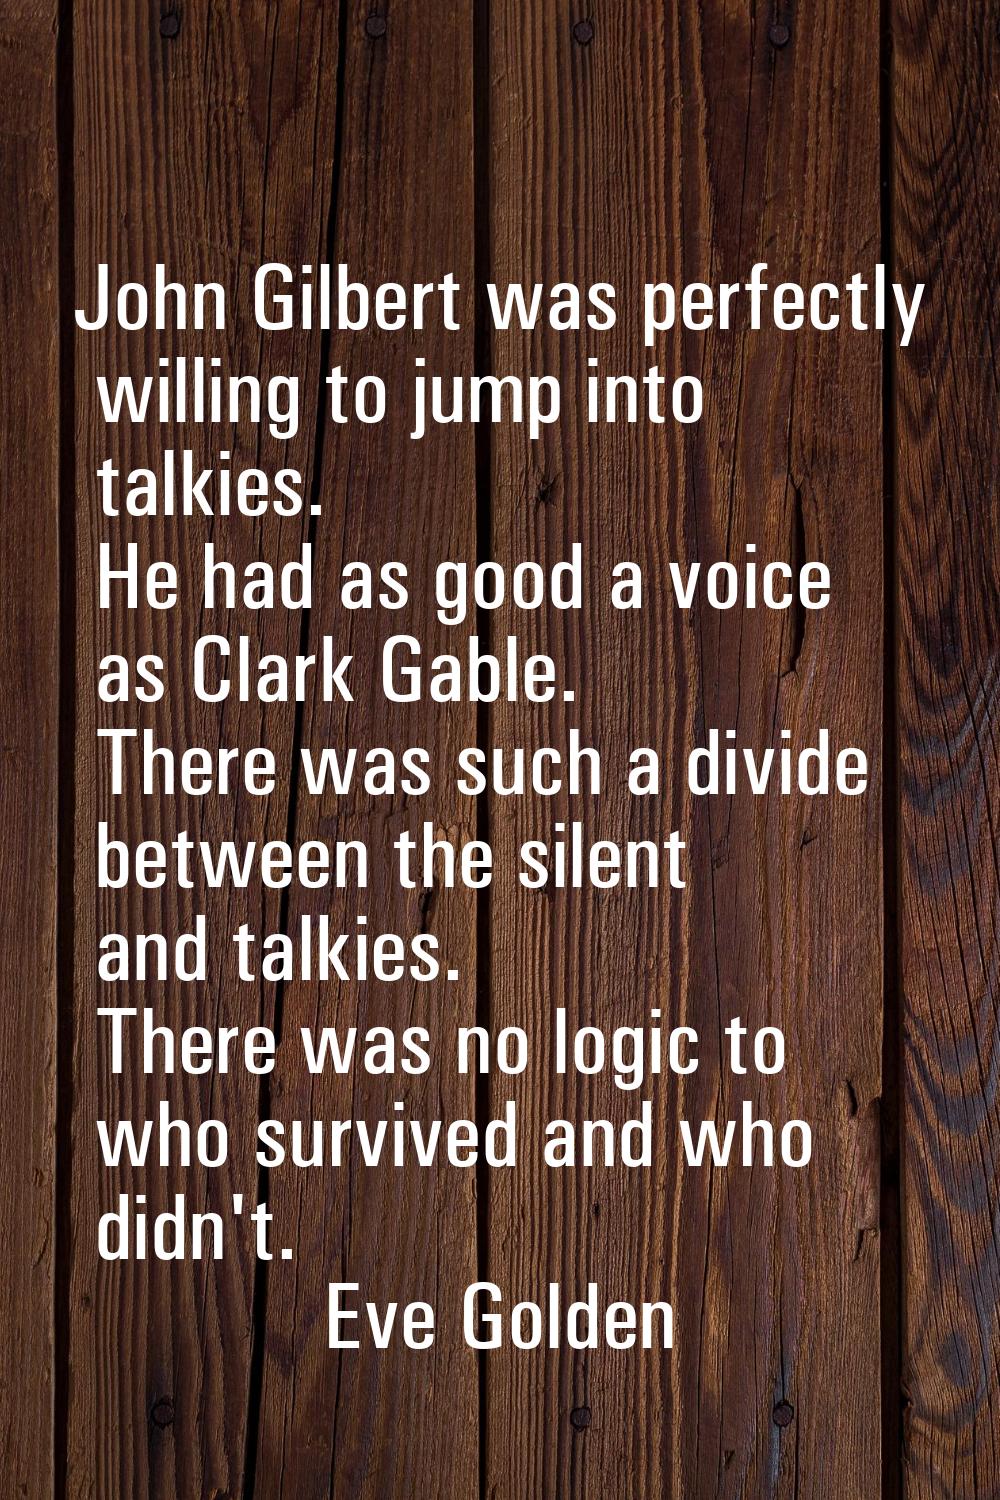 John Gilbert was perfectly willing to jump into talkies. He had as good a voice as Clark Gable. The